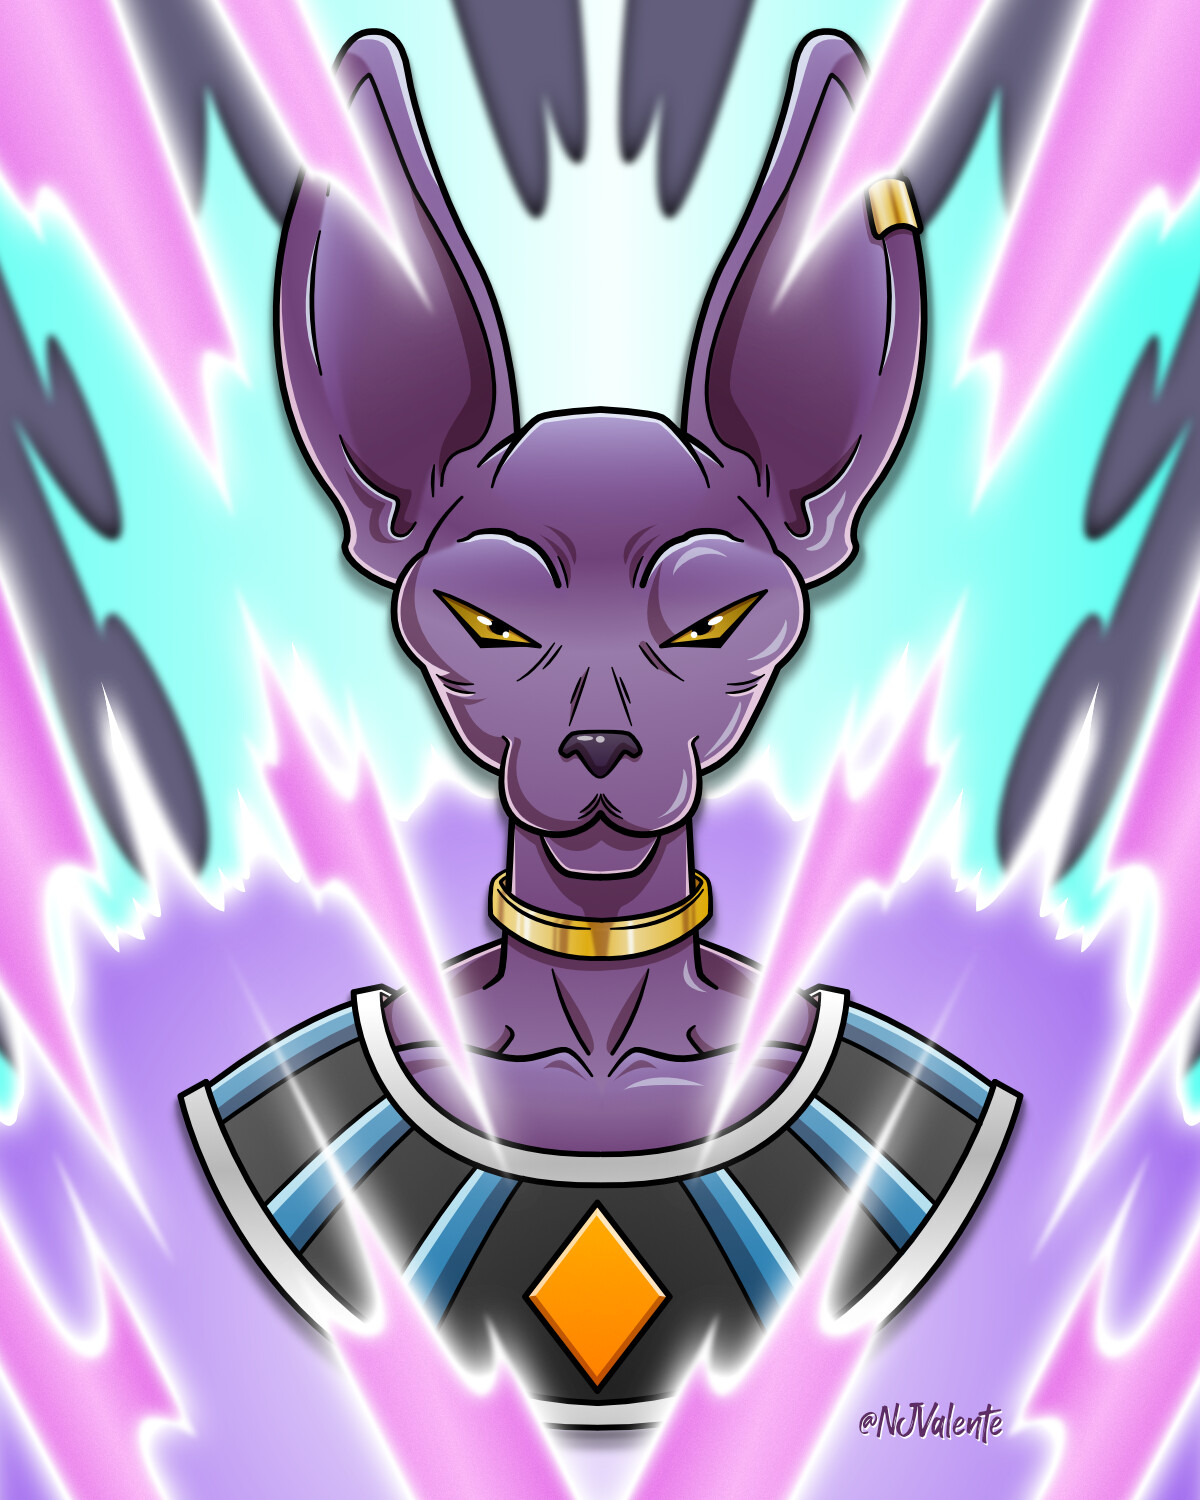 Lord Beerus vector art done in Affinity Designer.